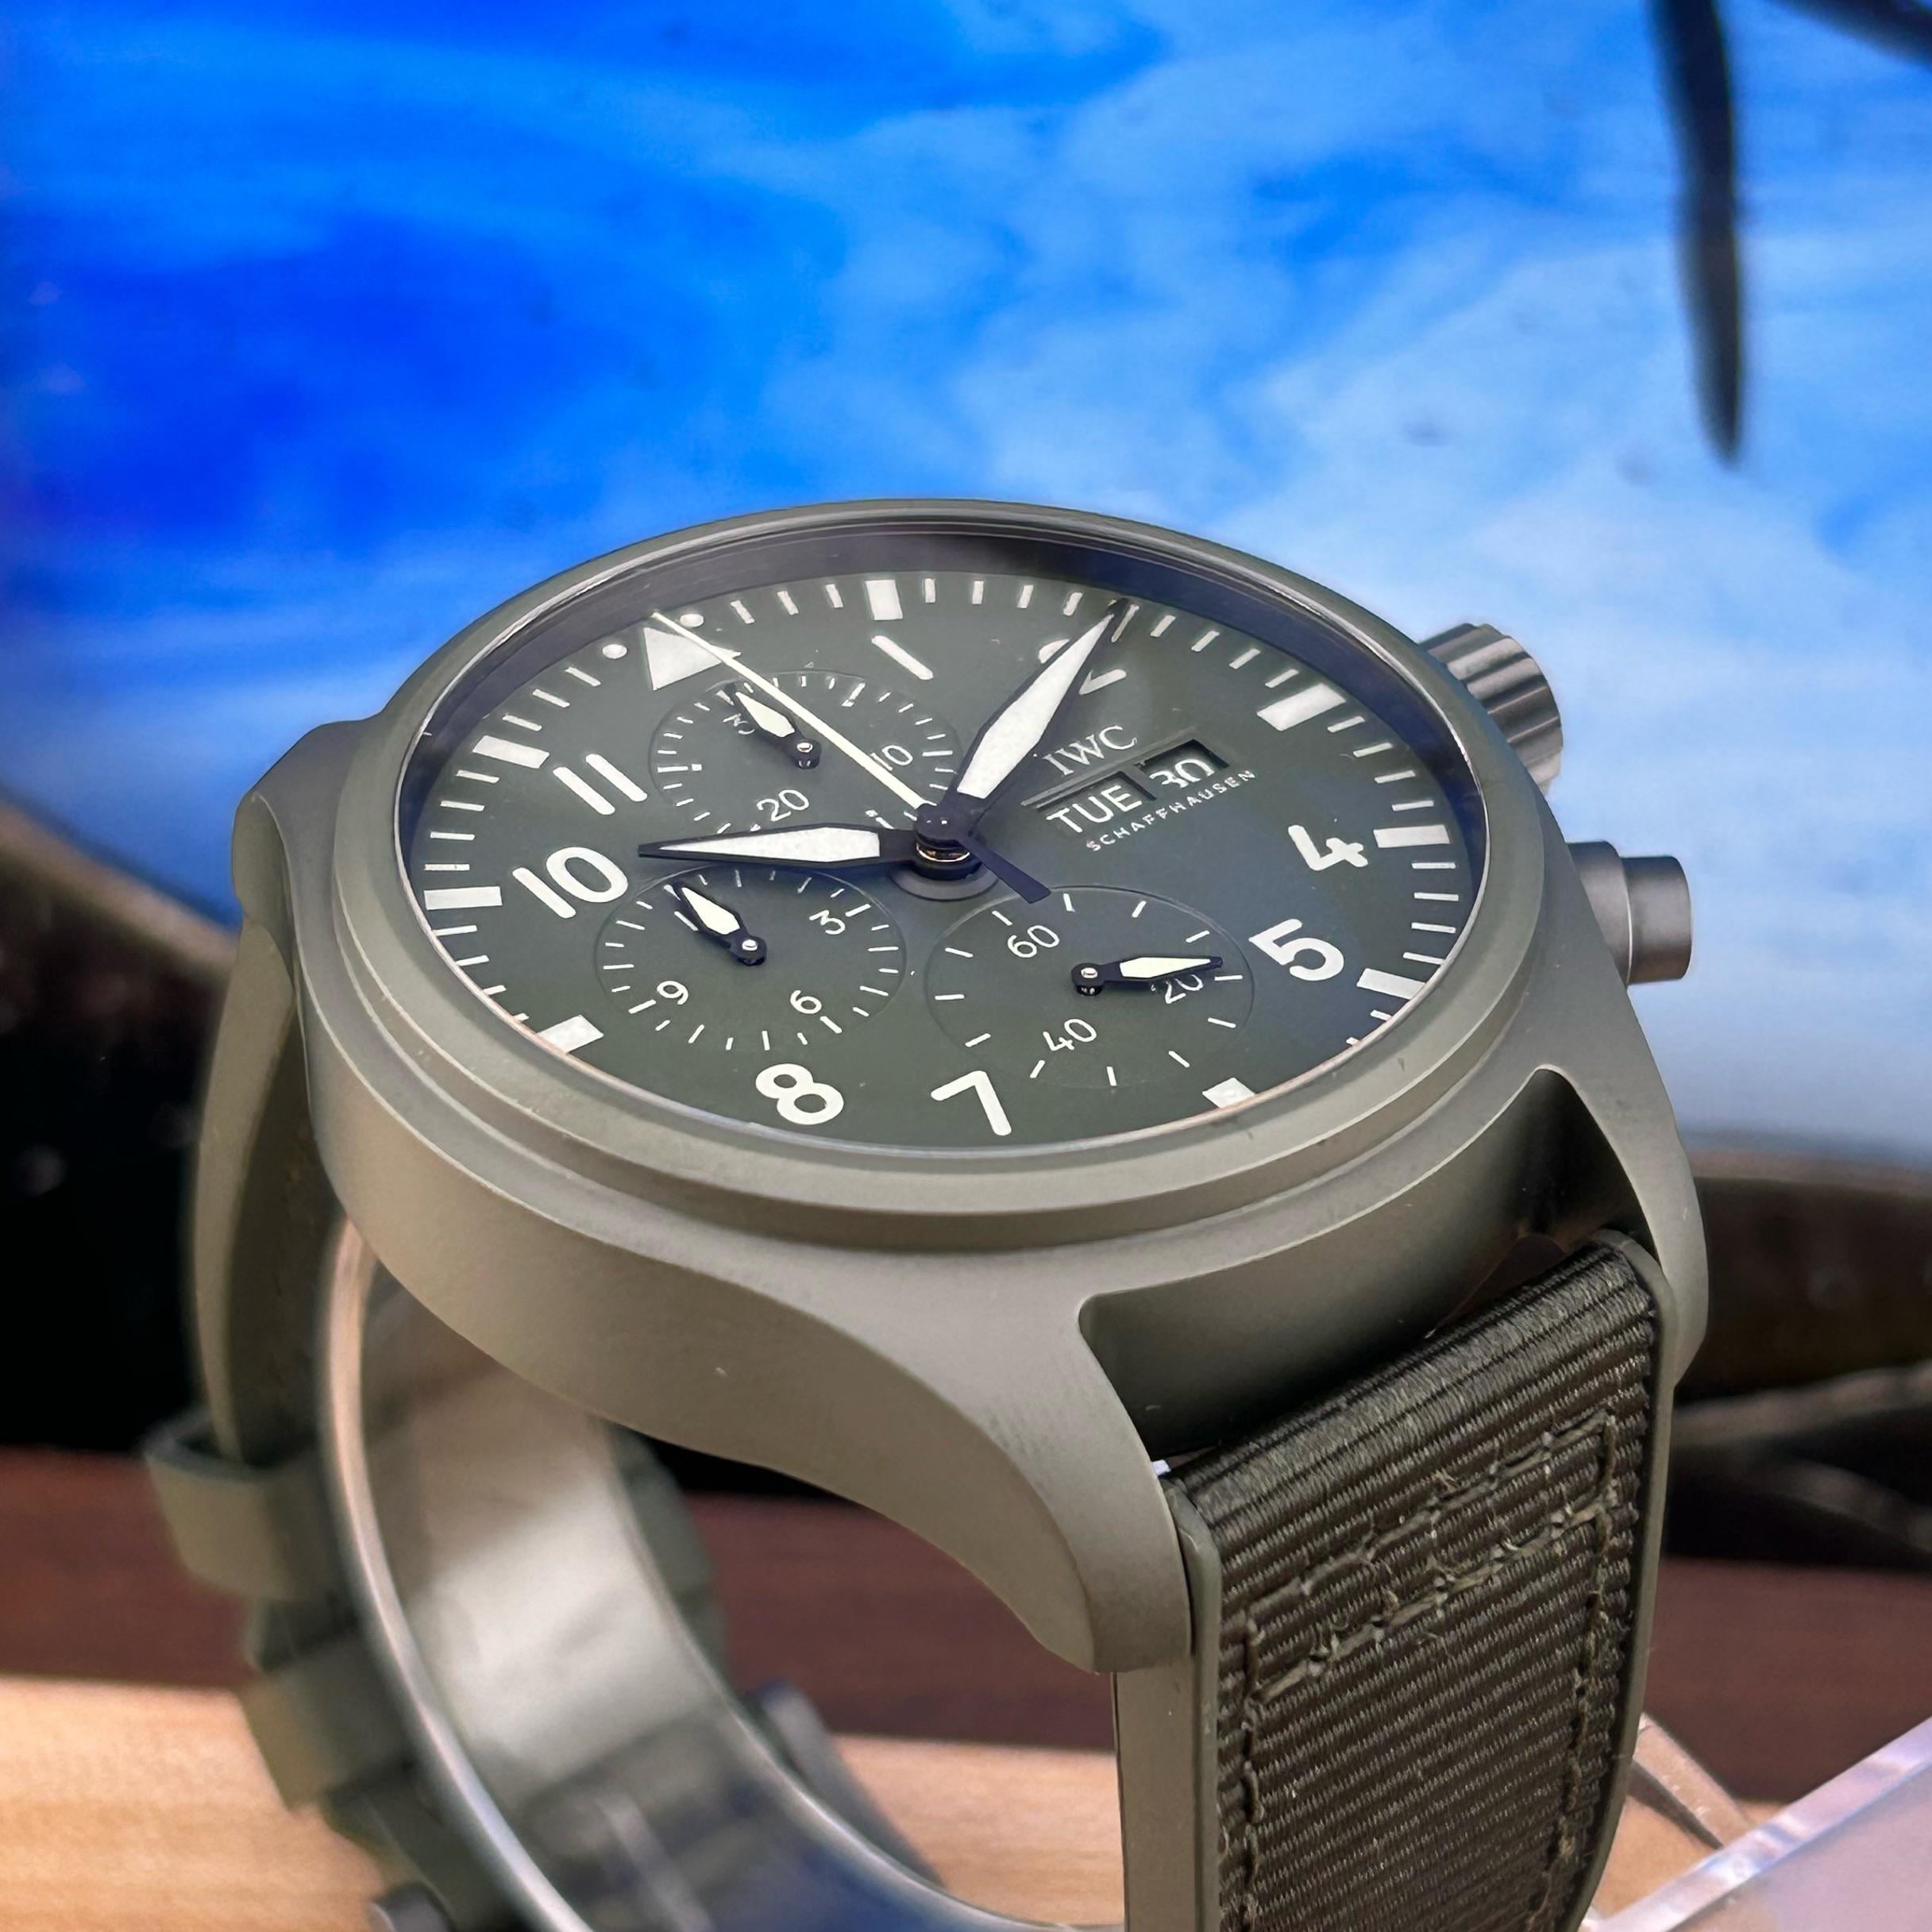 IWC Top Gun Pilot's watches go bold with colorful ceramic - Revolution Watch